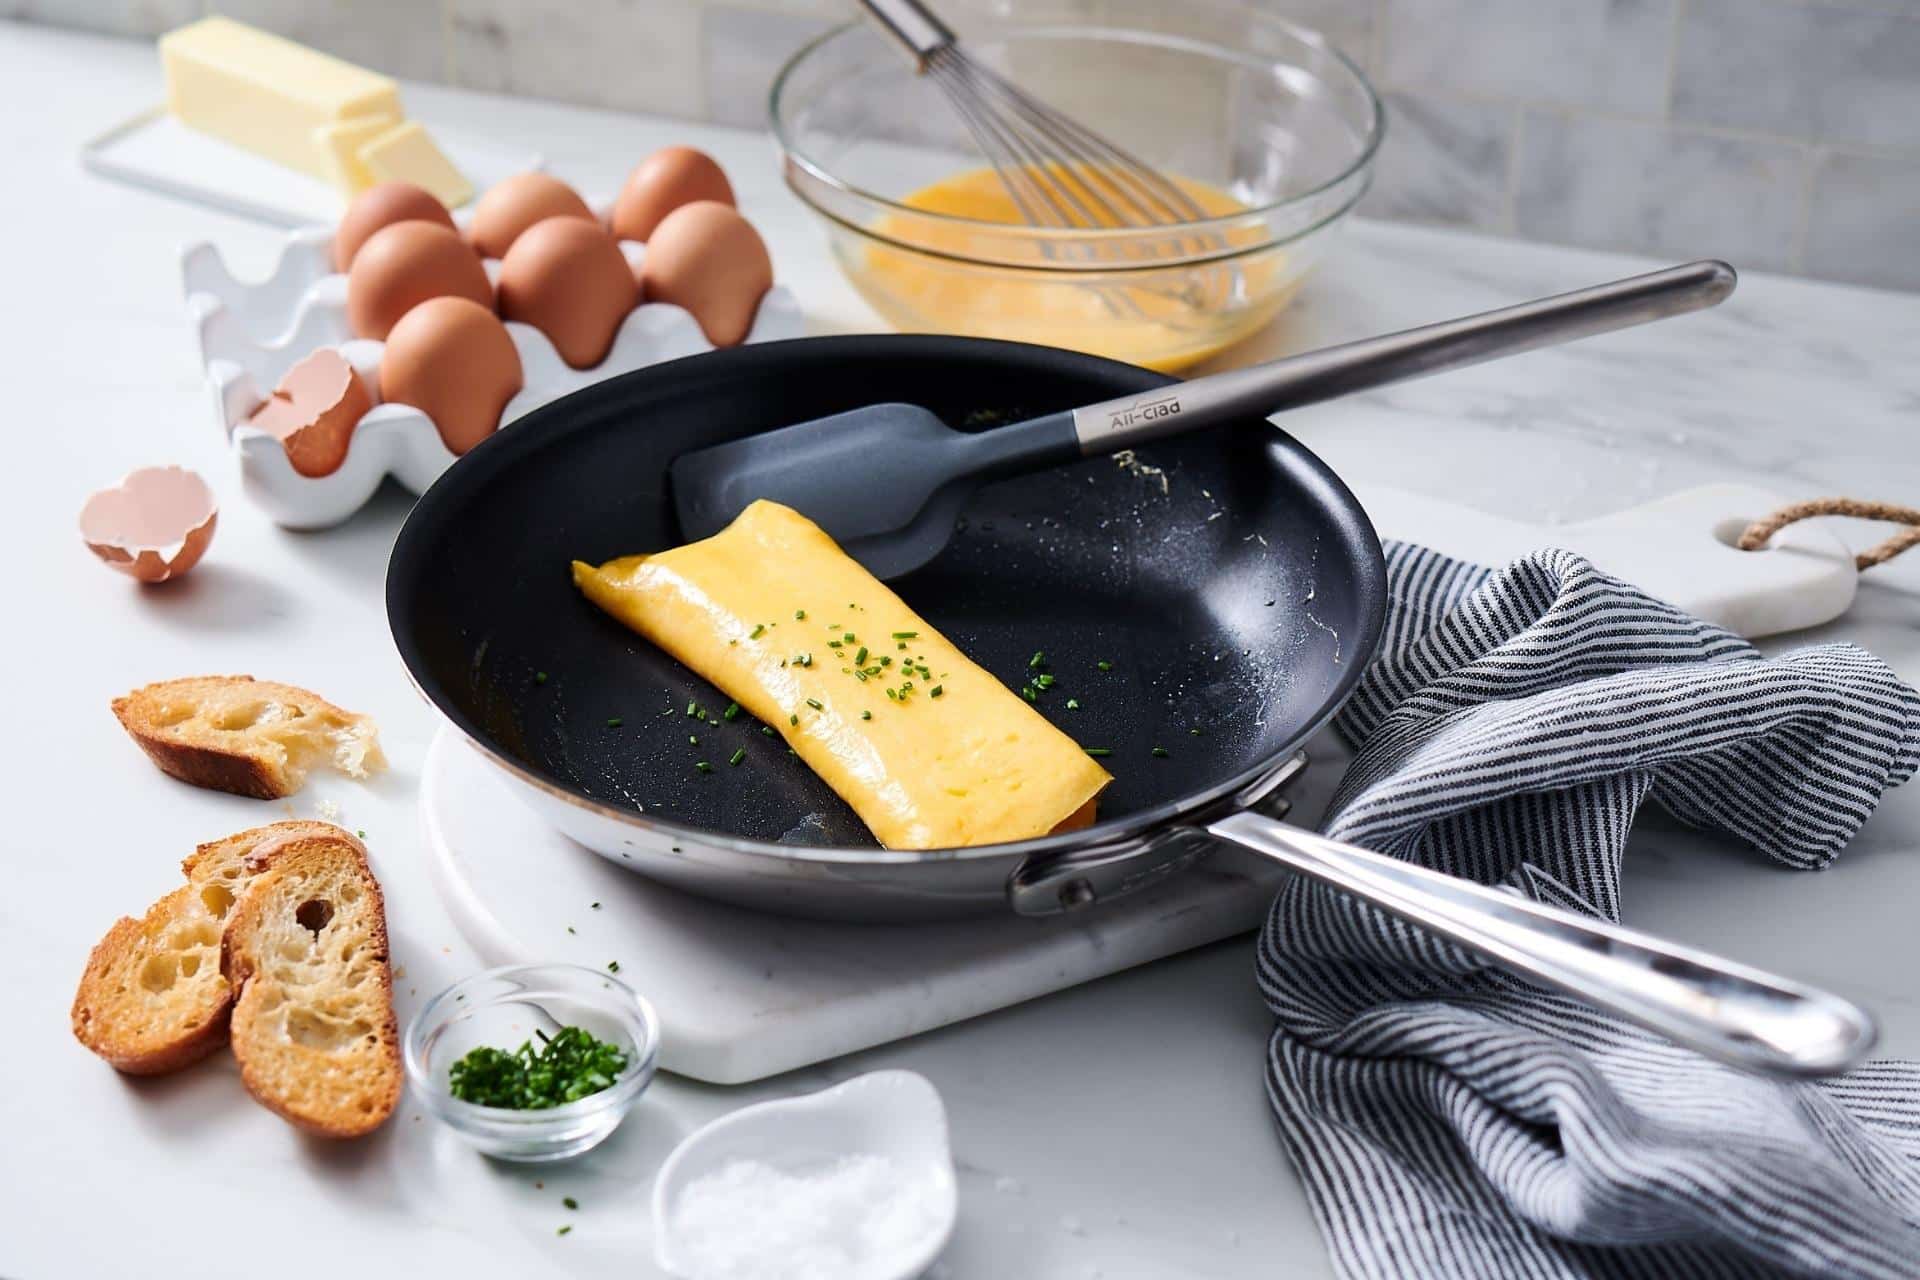 5 Healthy Egg Breakfast Recipes That Are Actually Quick and Easy